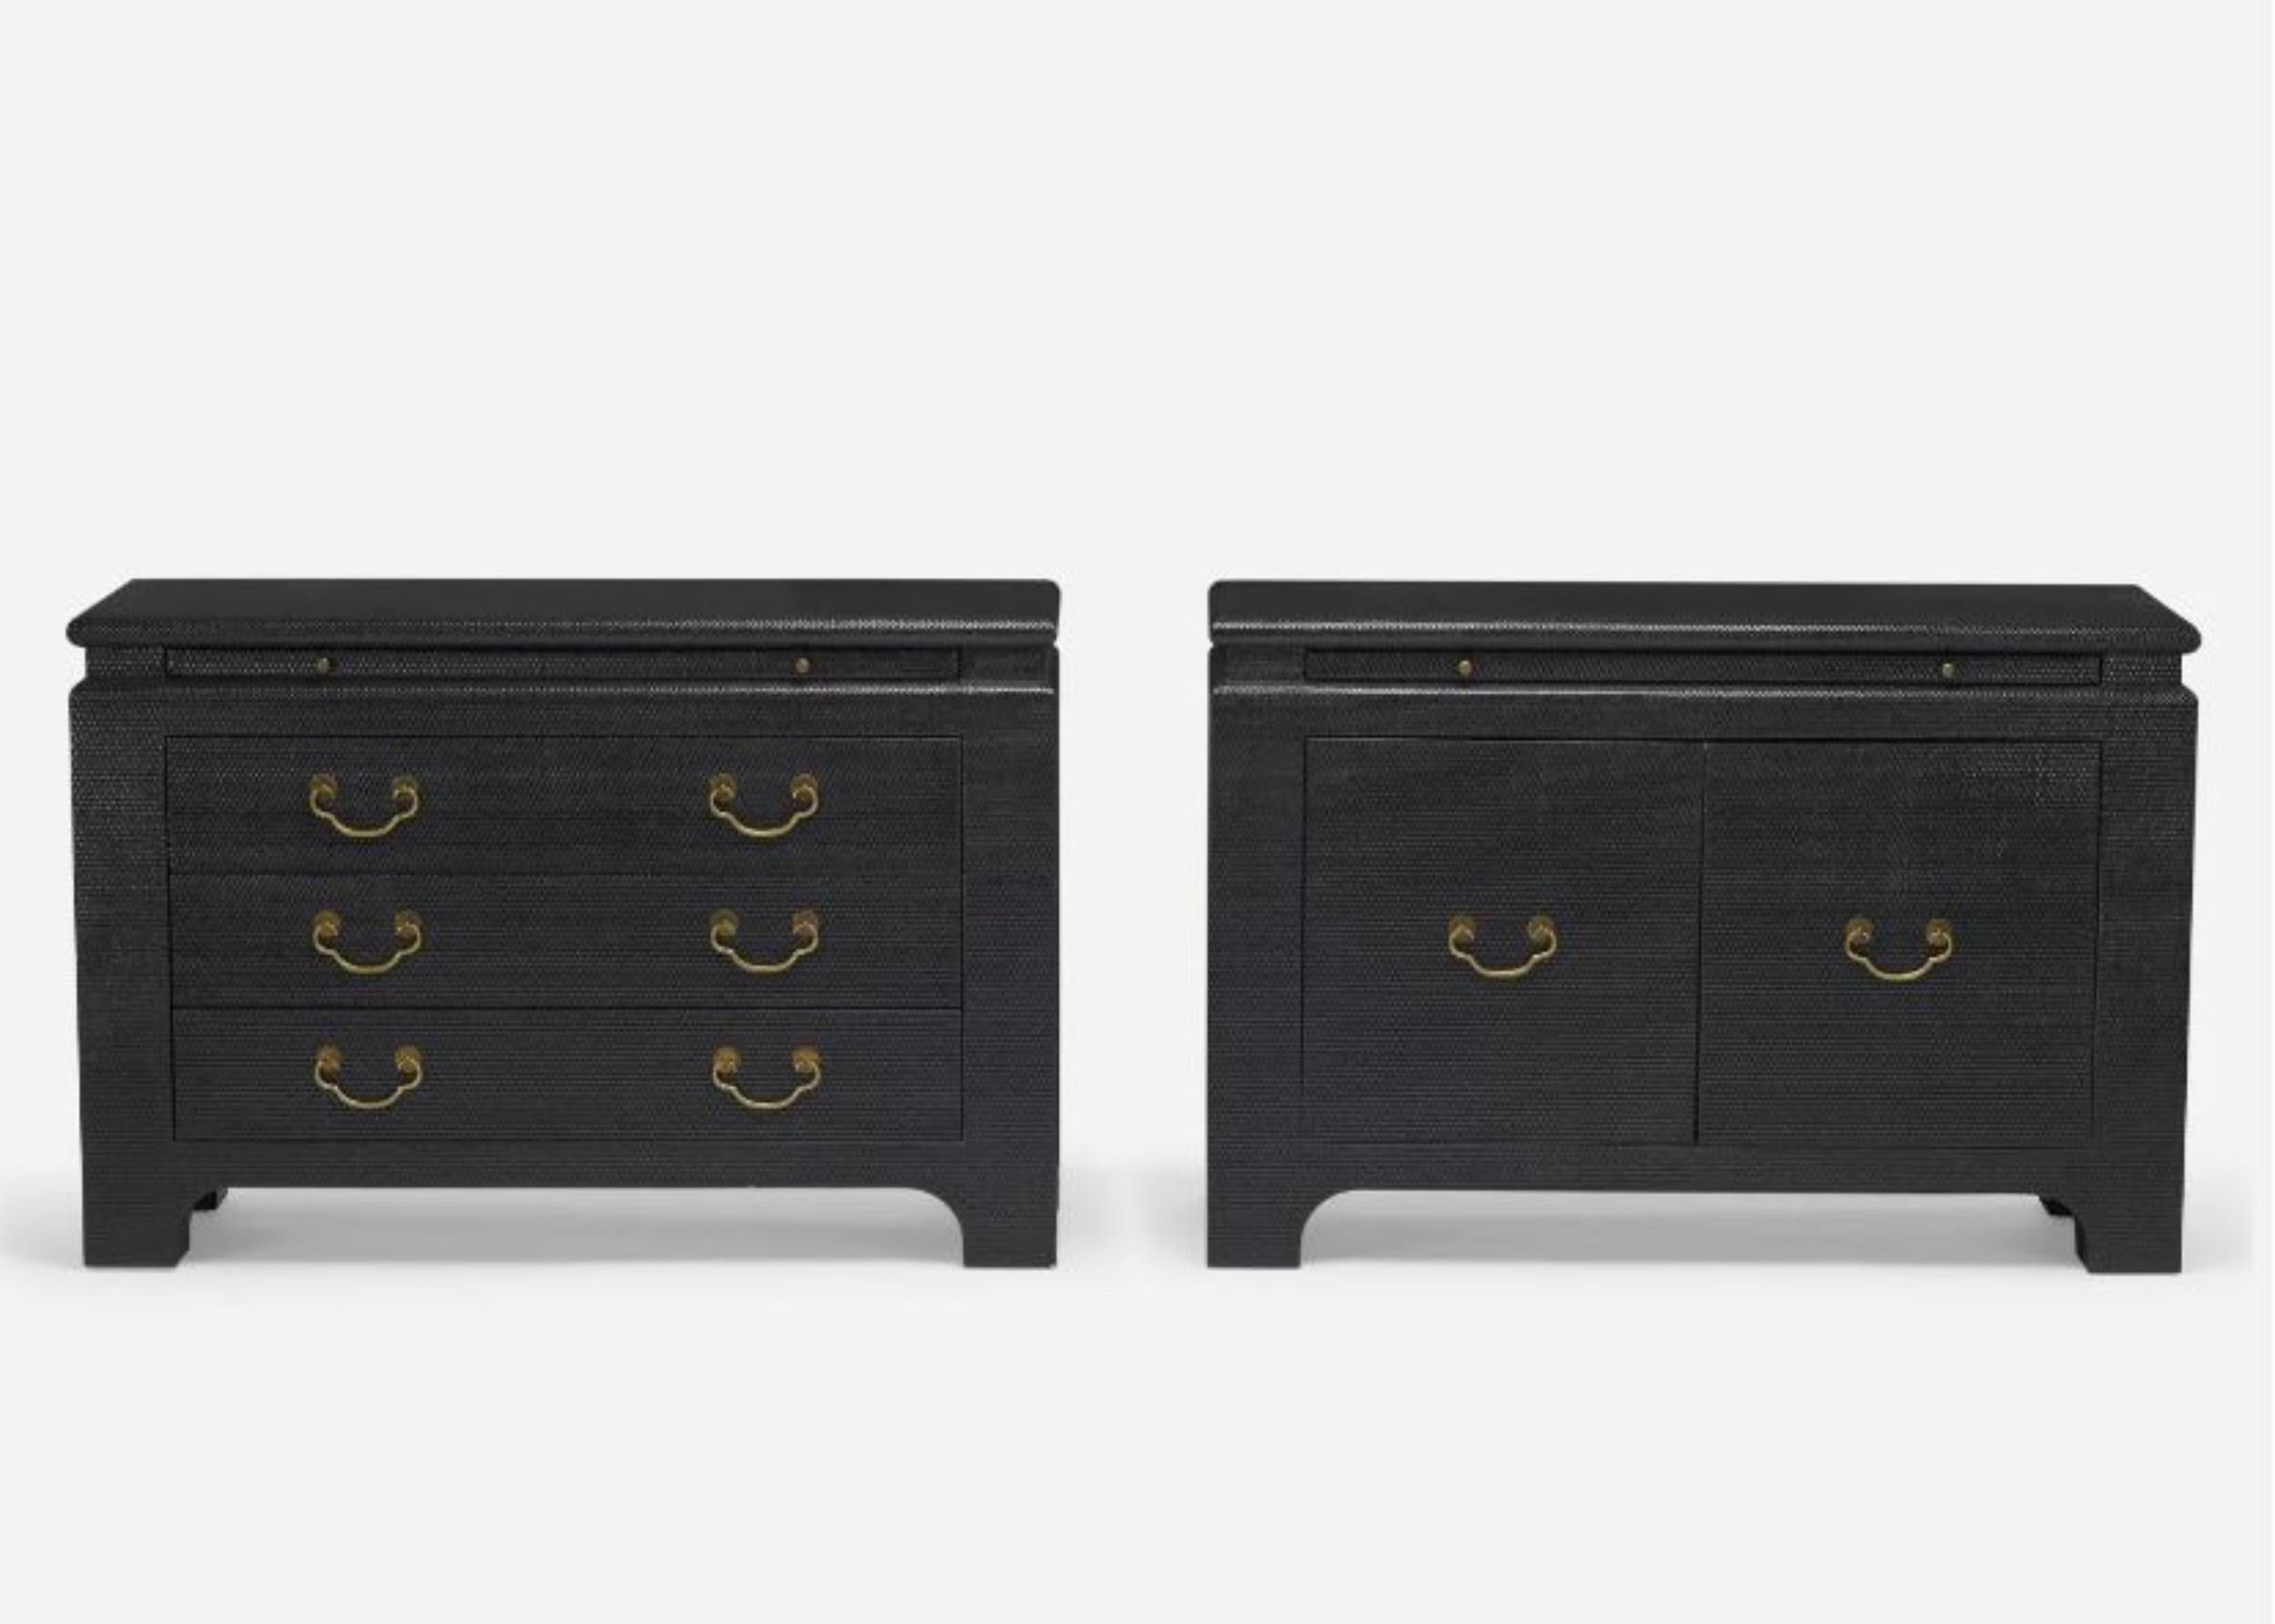 Pair of Mid-Century Modern commodes, nightstands or cabinets. This fine pair of Karl Springer Style cabinets by Harrison Van-Horn in a cloth wrapped black lacquered finish are simply stunning. This is from the East West Collection with one cabinet